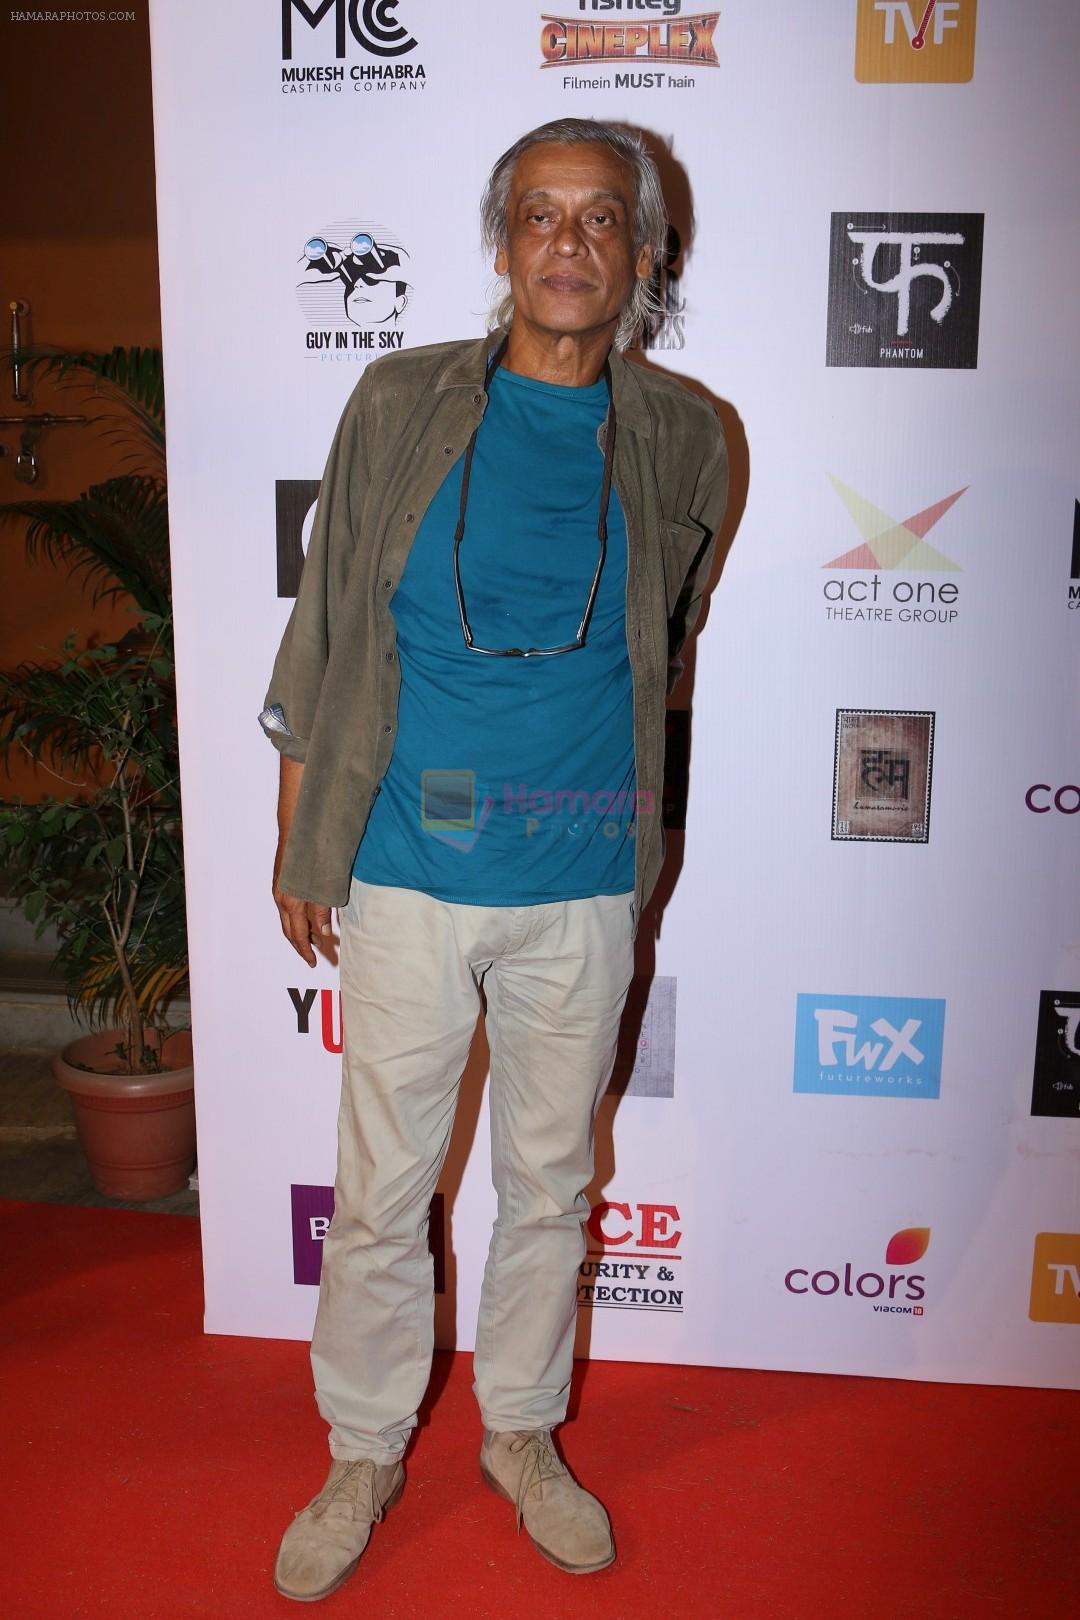 Sudhir Mishra at Colors khidkiyaan Theatre Festival on 2nd March 2017